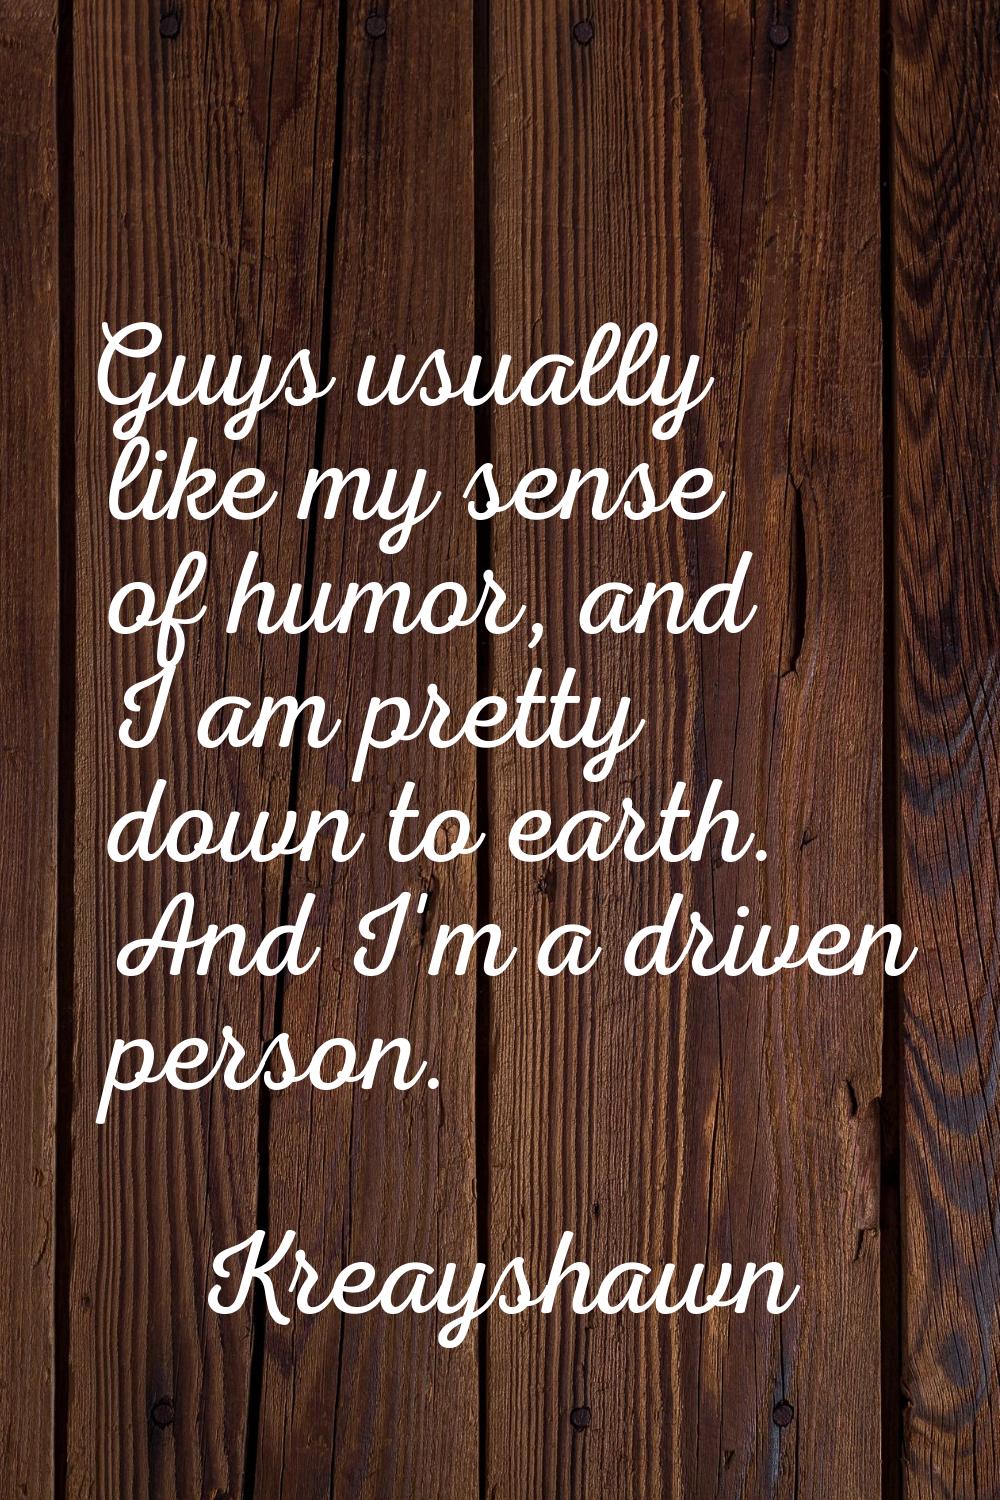 Guys usually like my sense of humor, and I am pretty down to earth. And I'm a driven person.